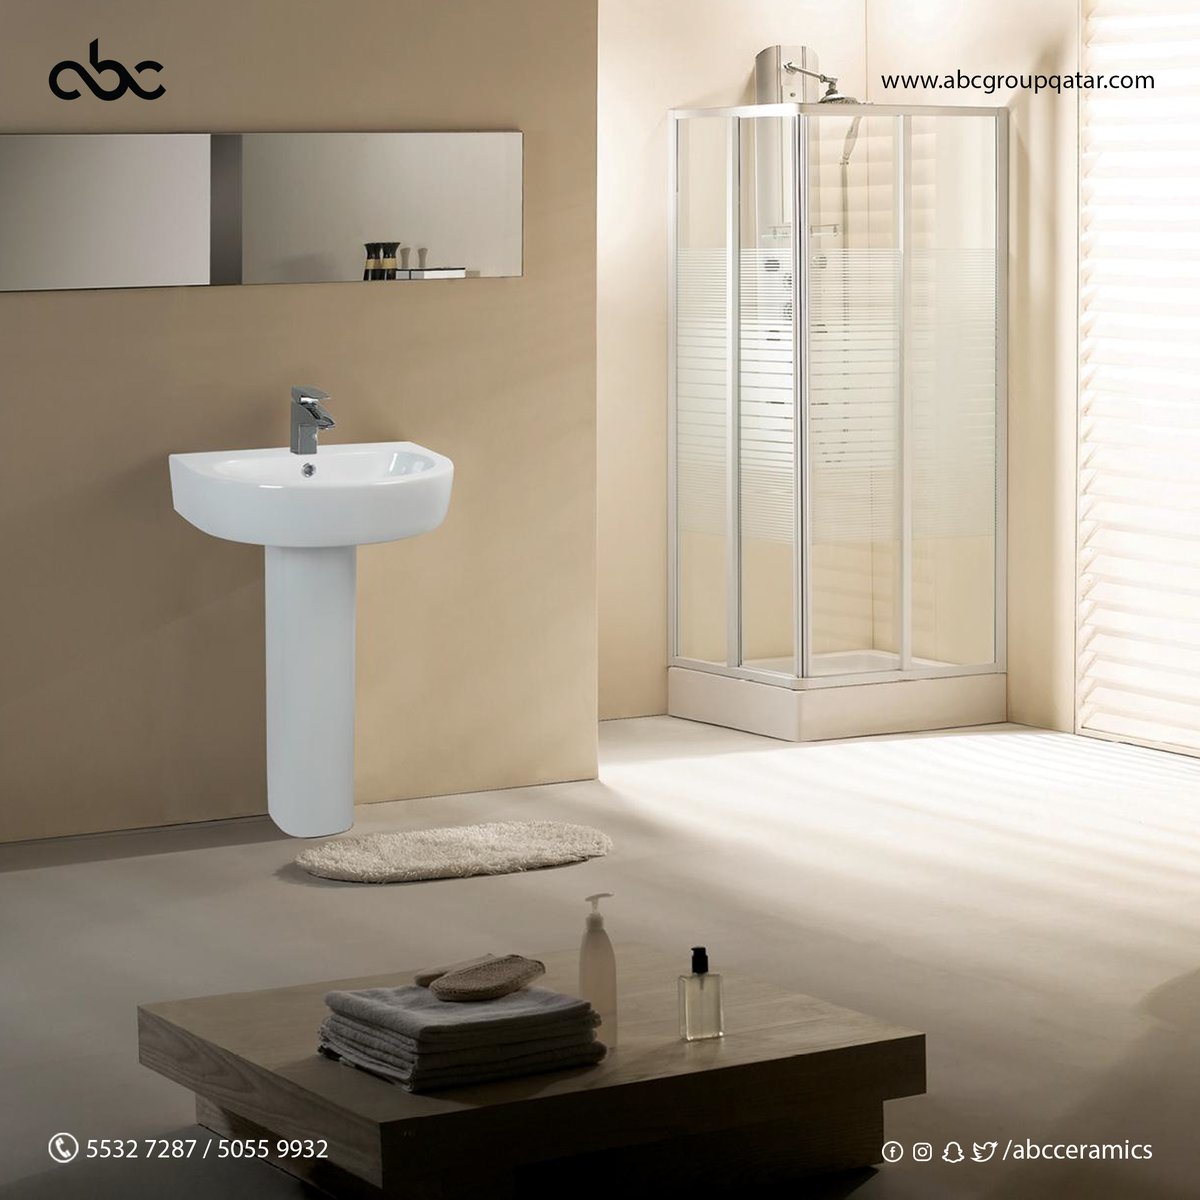 Design your washroom with us. New collection of sanitaryware and bathroom tiles arrived. Visit our showroom or call 3351 2431 / 5532 7287 for more details

#abcceramic #abcceramics #sanitaryware #bathware #steamroom #bathroomaccessories #bathroomfittings #washroom #showerrooms